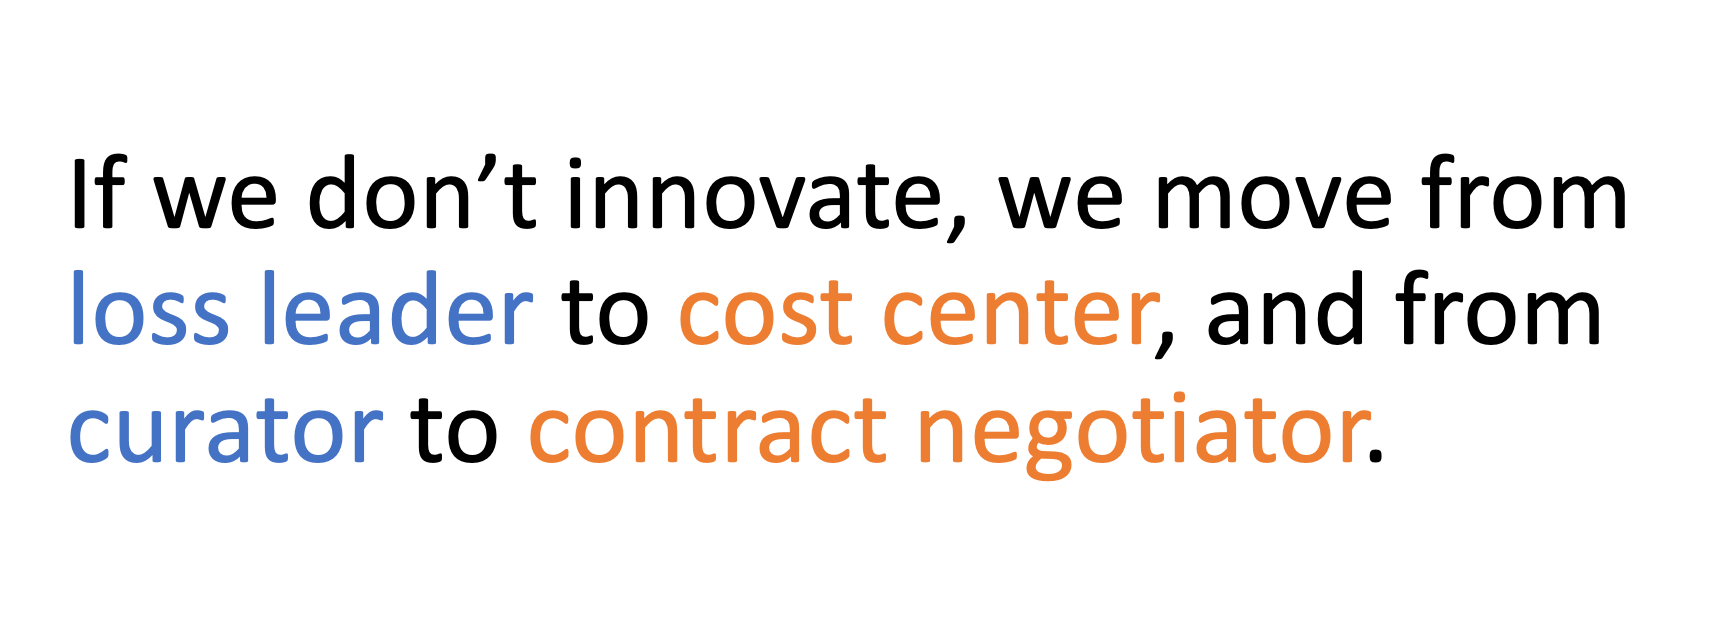 If we don't innovate, we move from loss leader to cost center, and from curator to contract negotiator